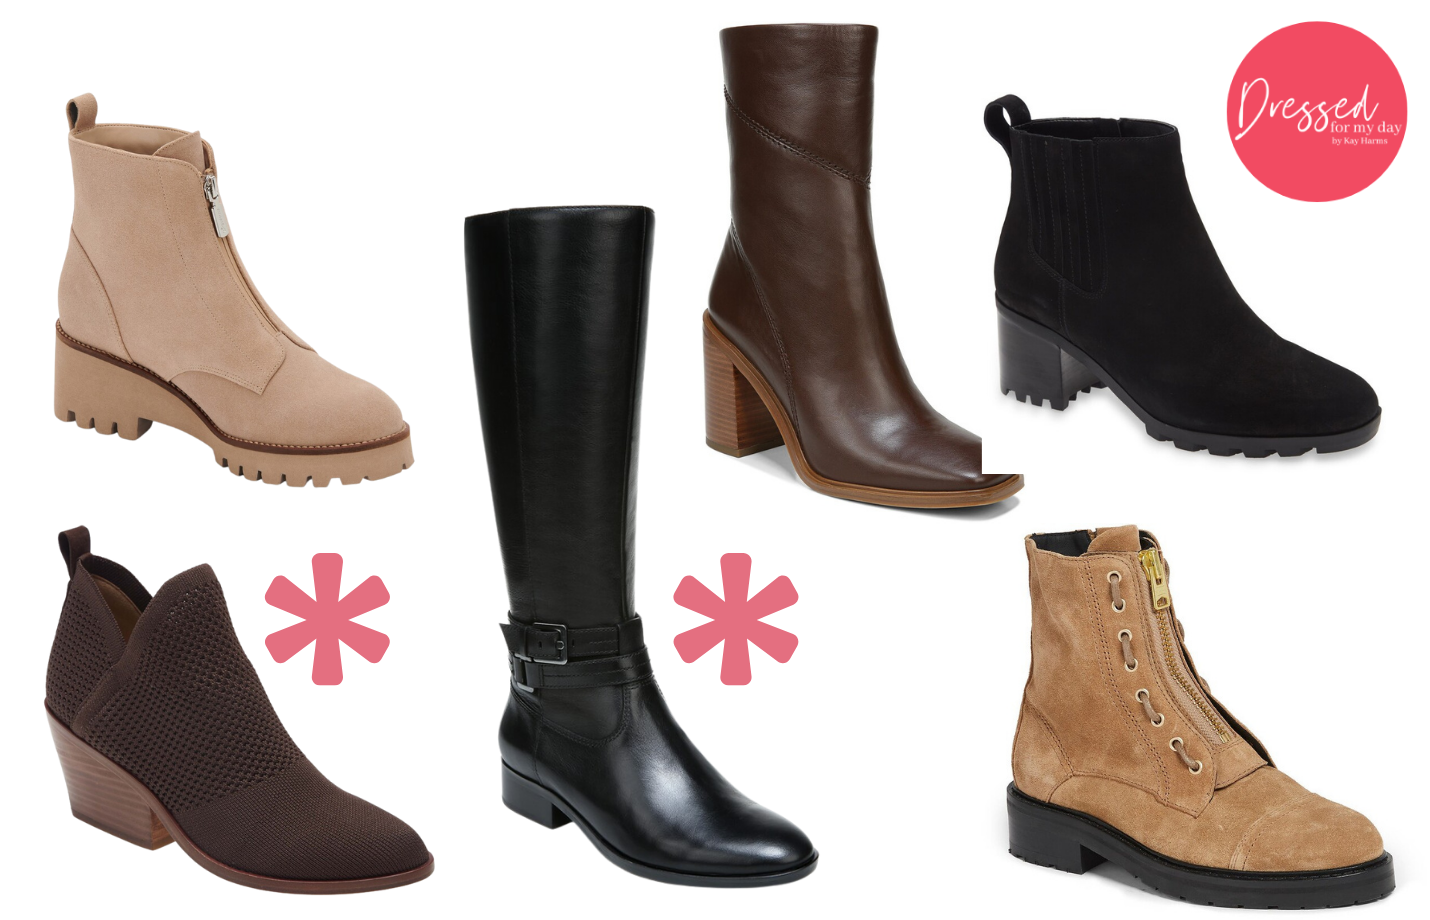 Nordstrom Anniversary Sale boots and booties favorites